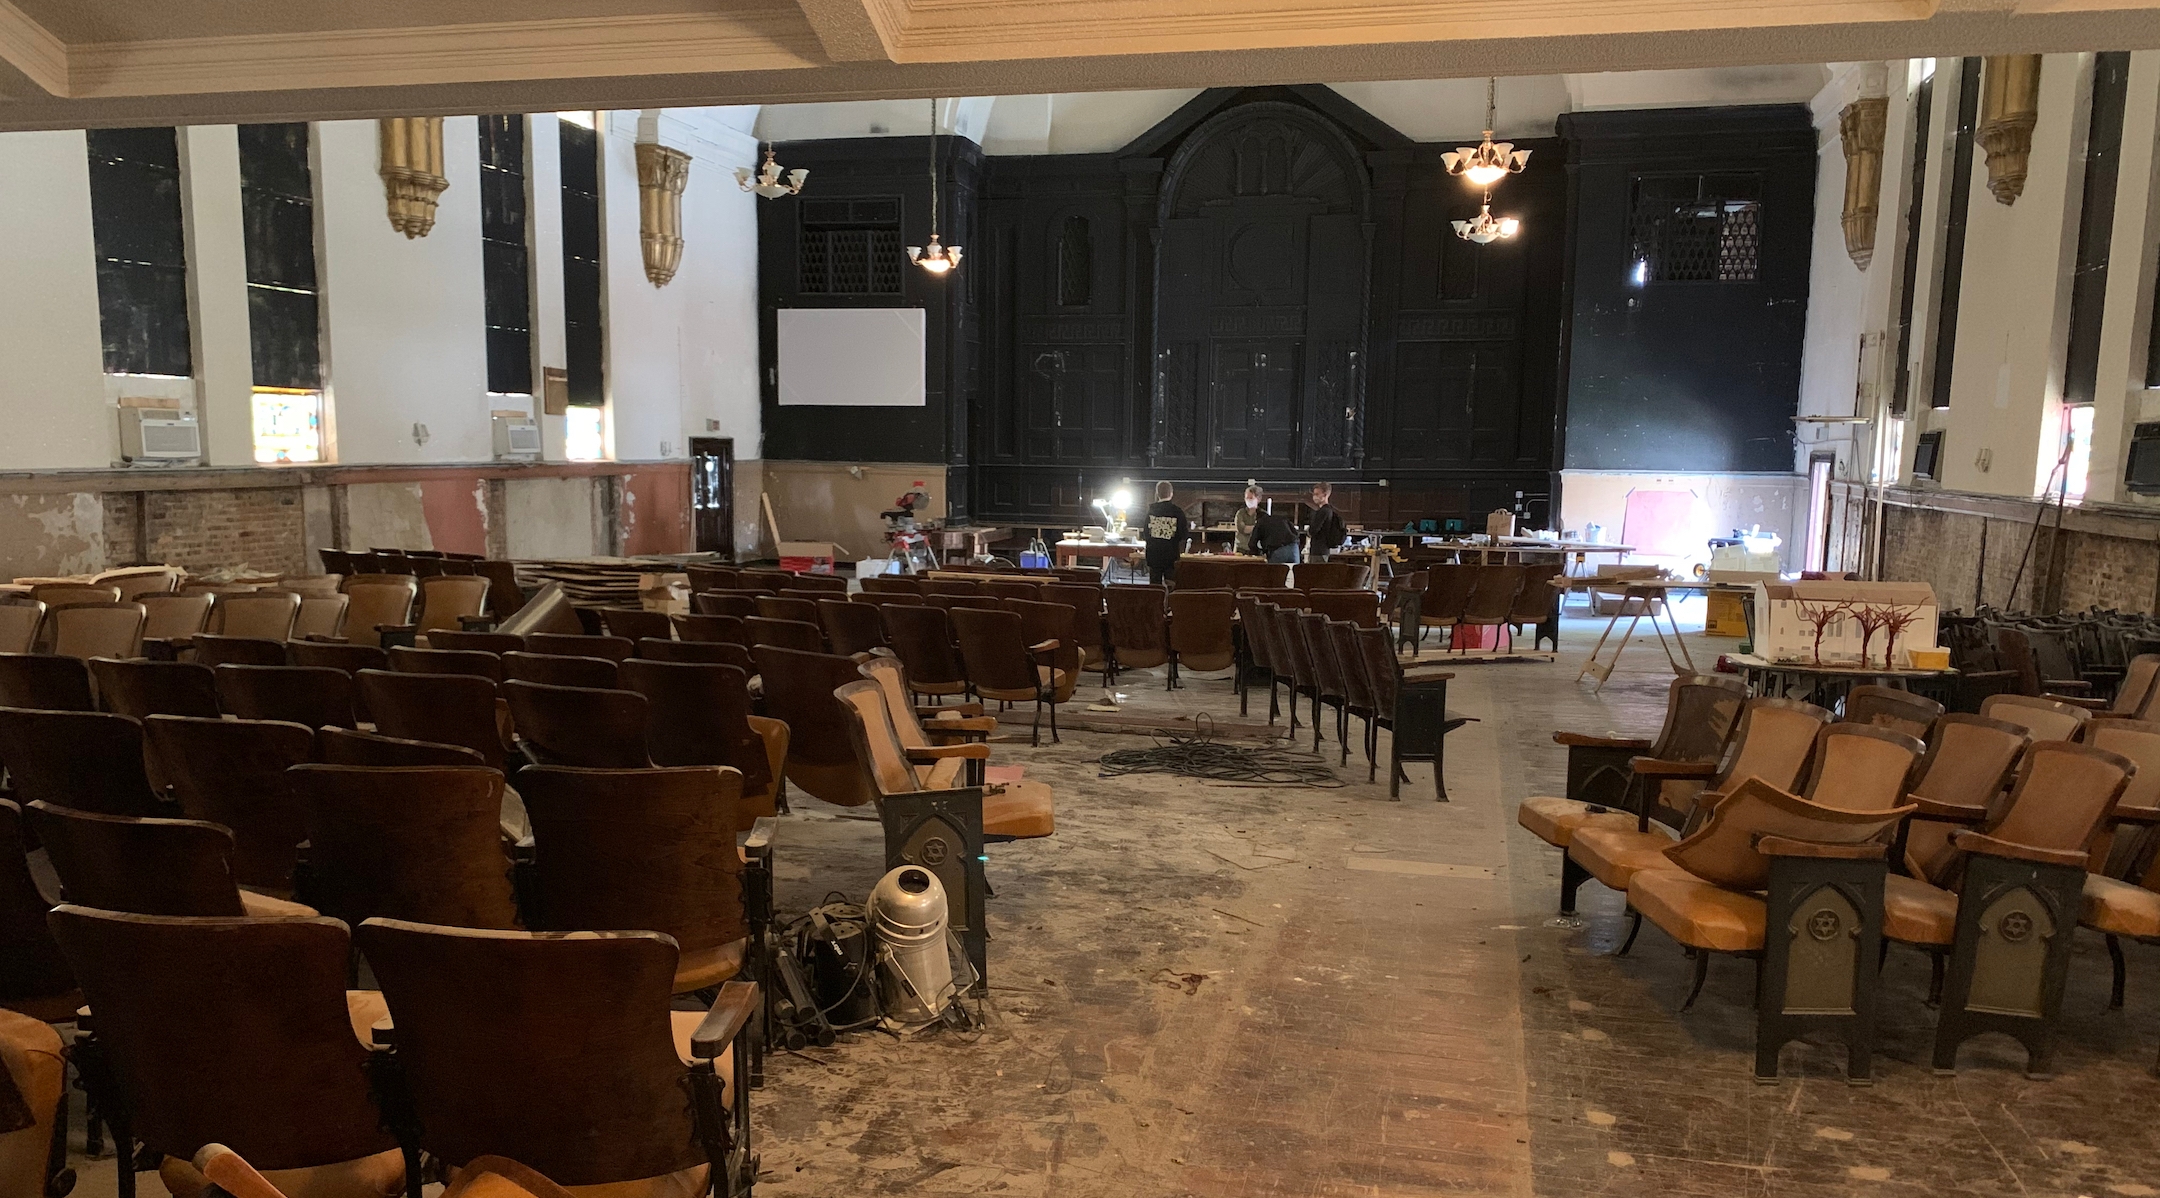 The former Congregation B'nai Bezalel in Chicago, under renovation